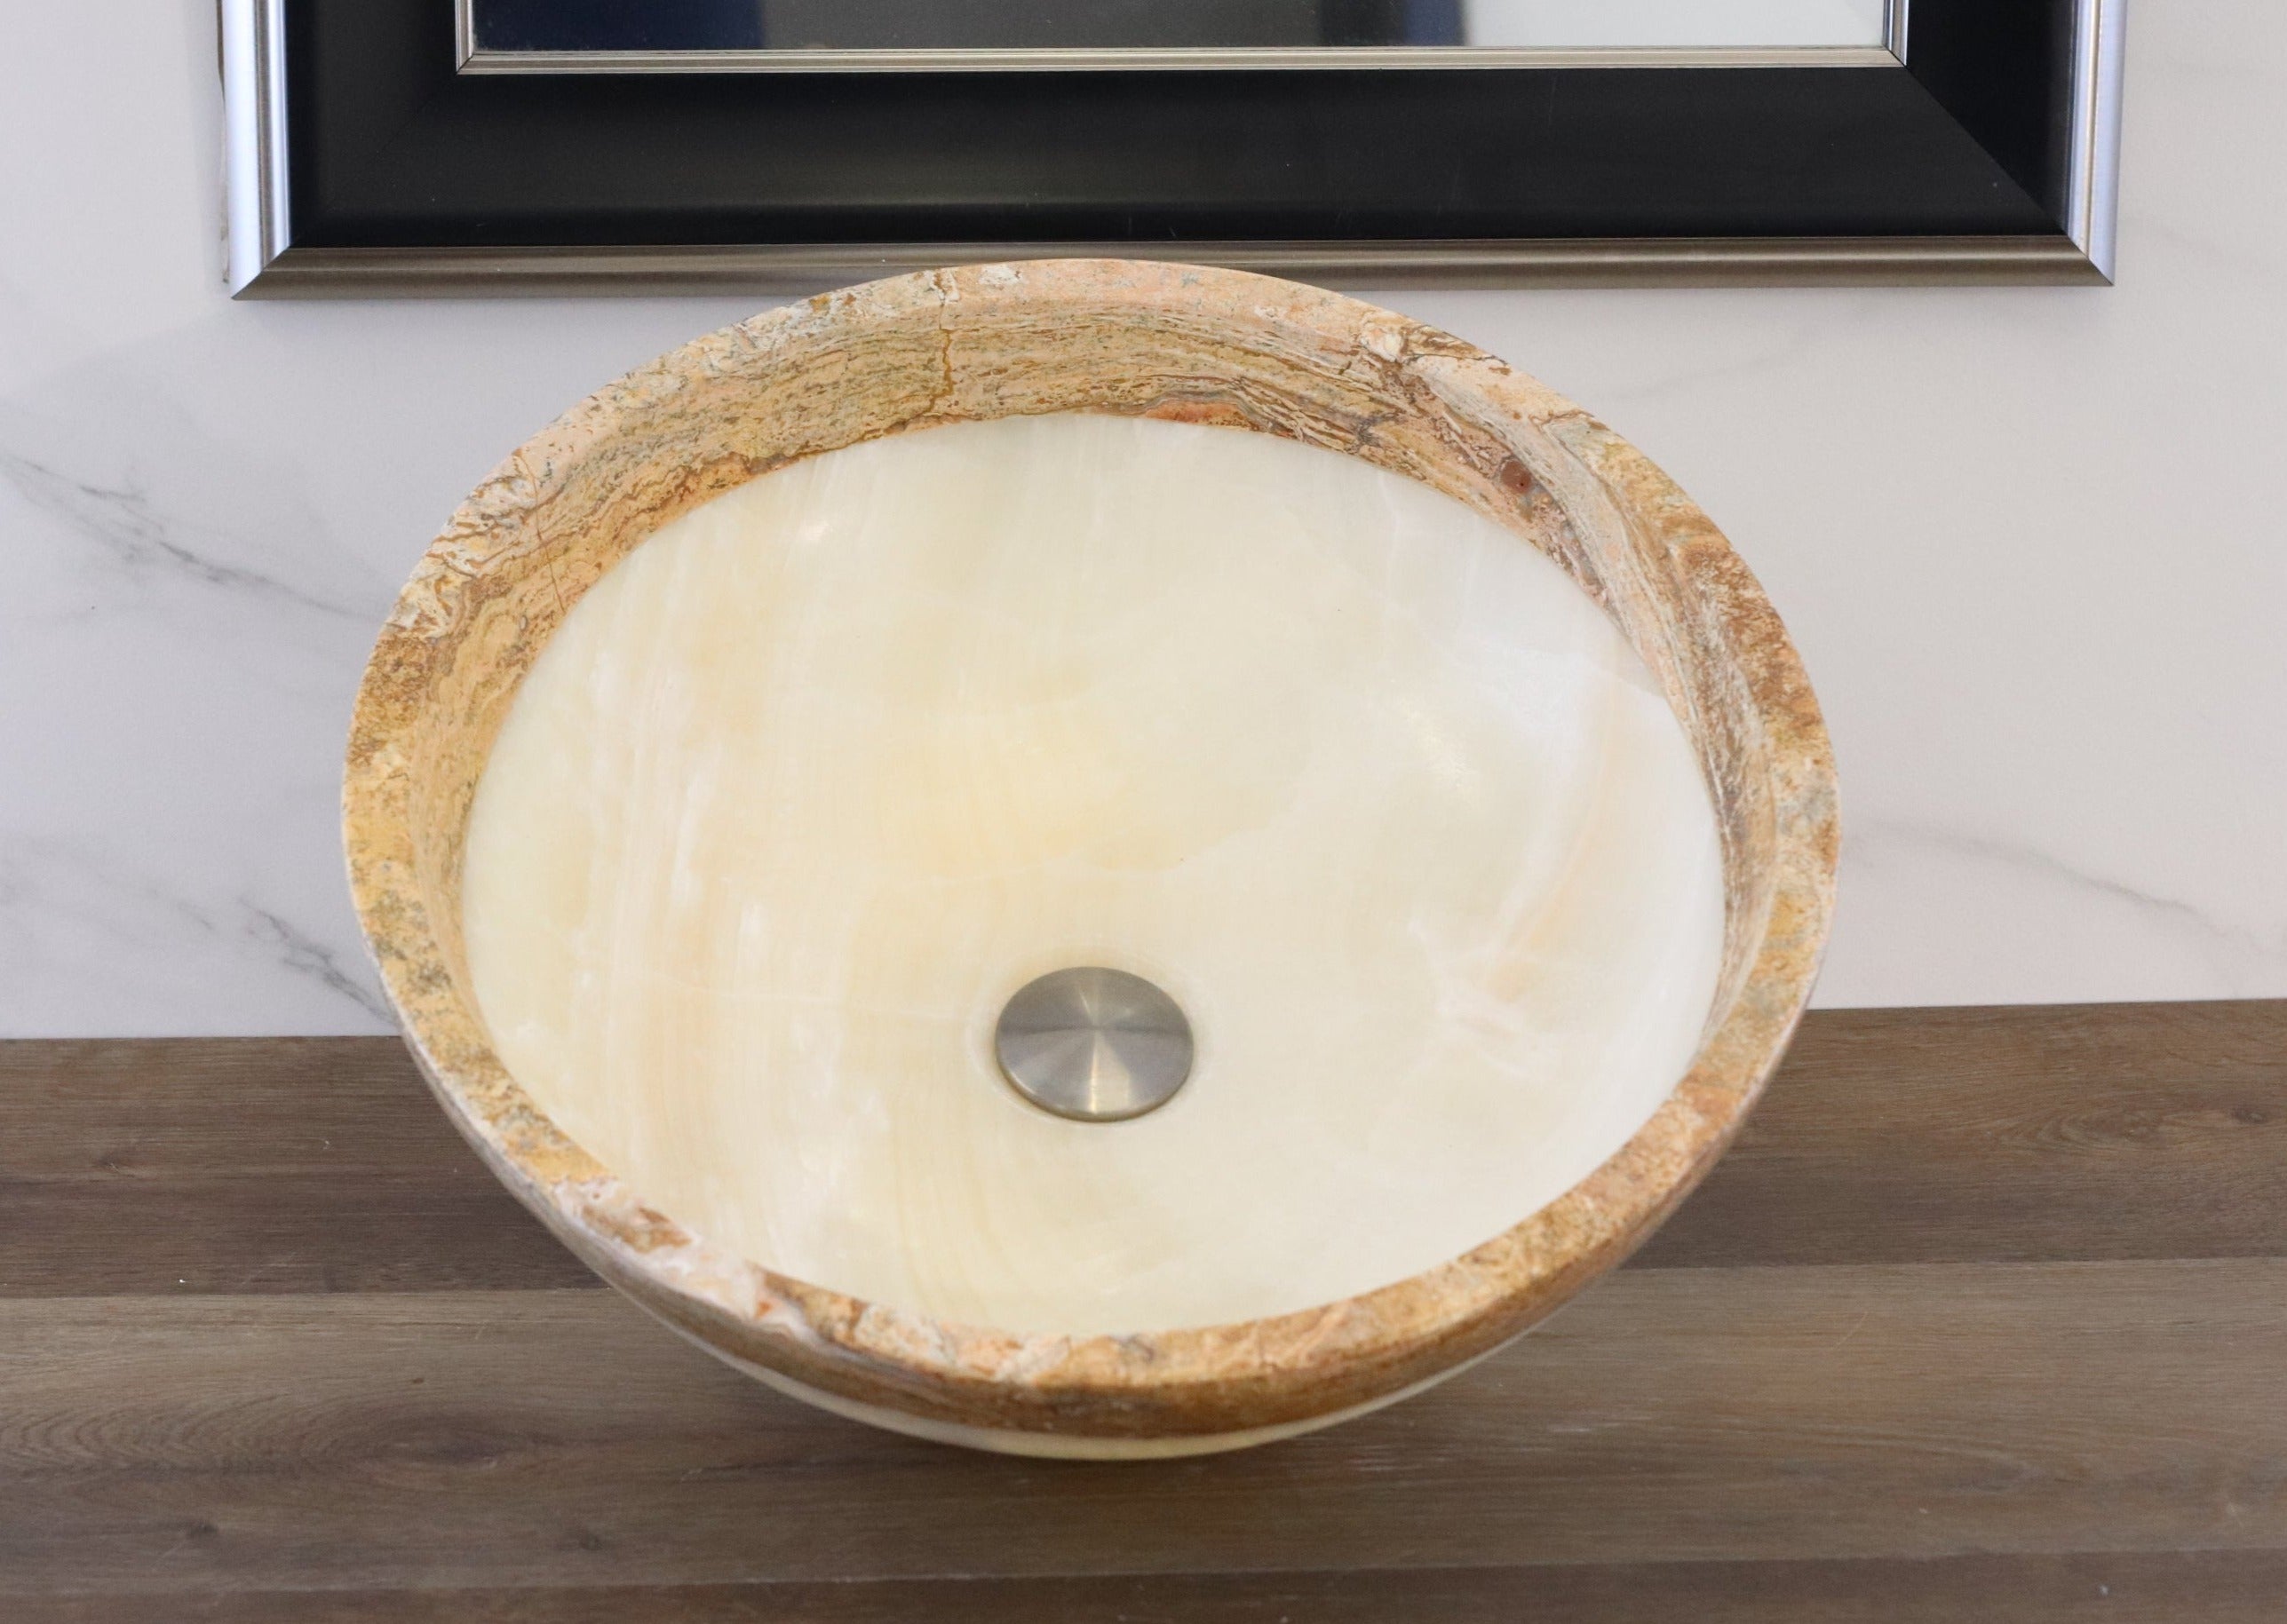 White Round Onyx and Travertine Stone Vessel Above Counter Bathroom Sink. Handmade in Mexico. Hand finished and ships from the USA. Buy now at www.felipeandgrace.com. 